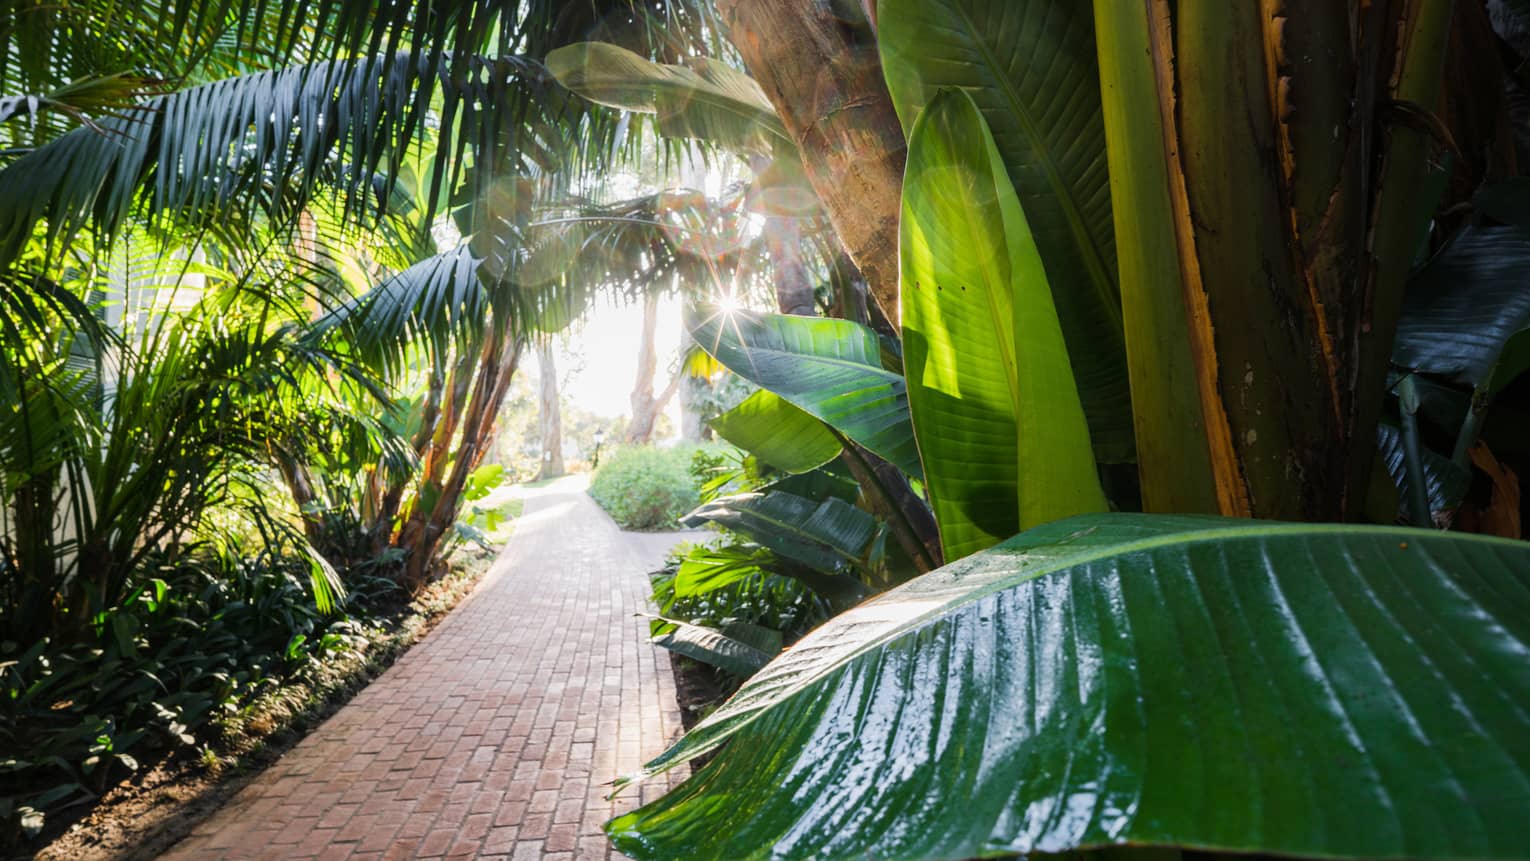 Large palm leaves over red brick path through sunny garden